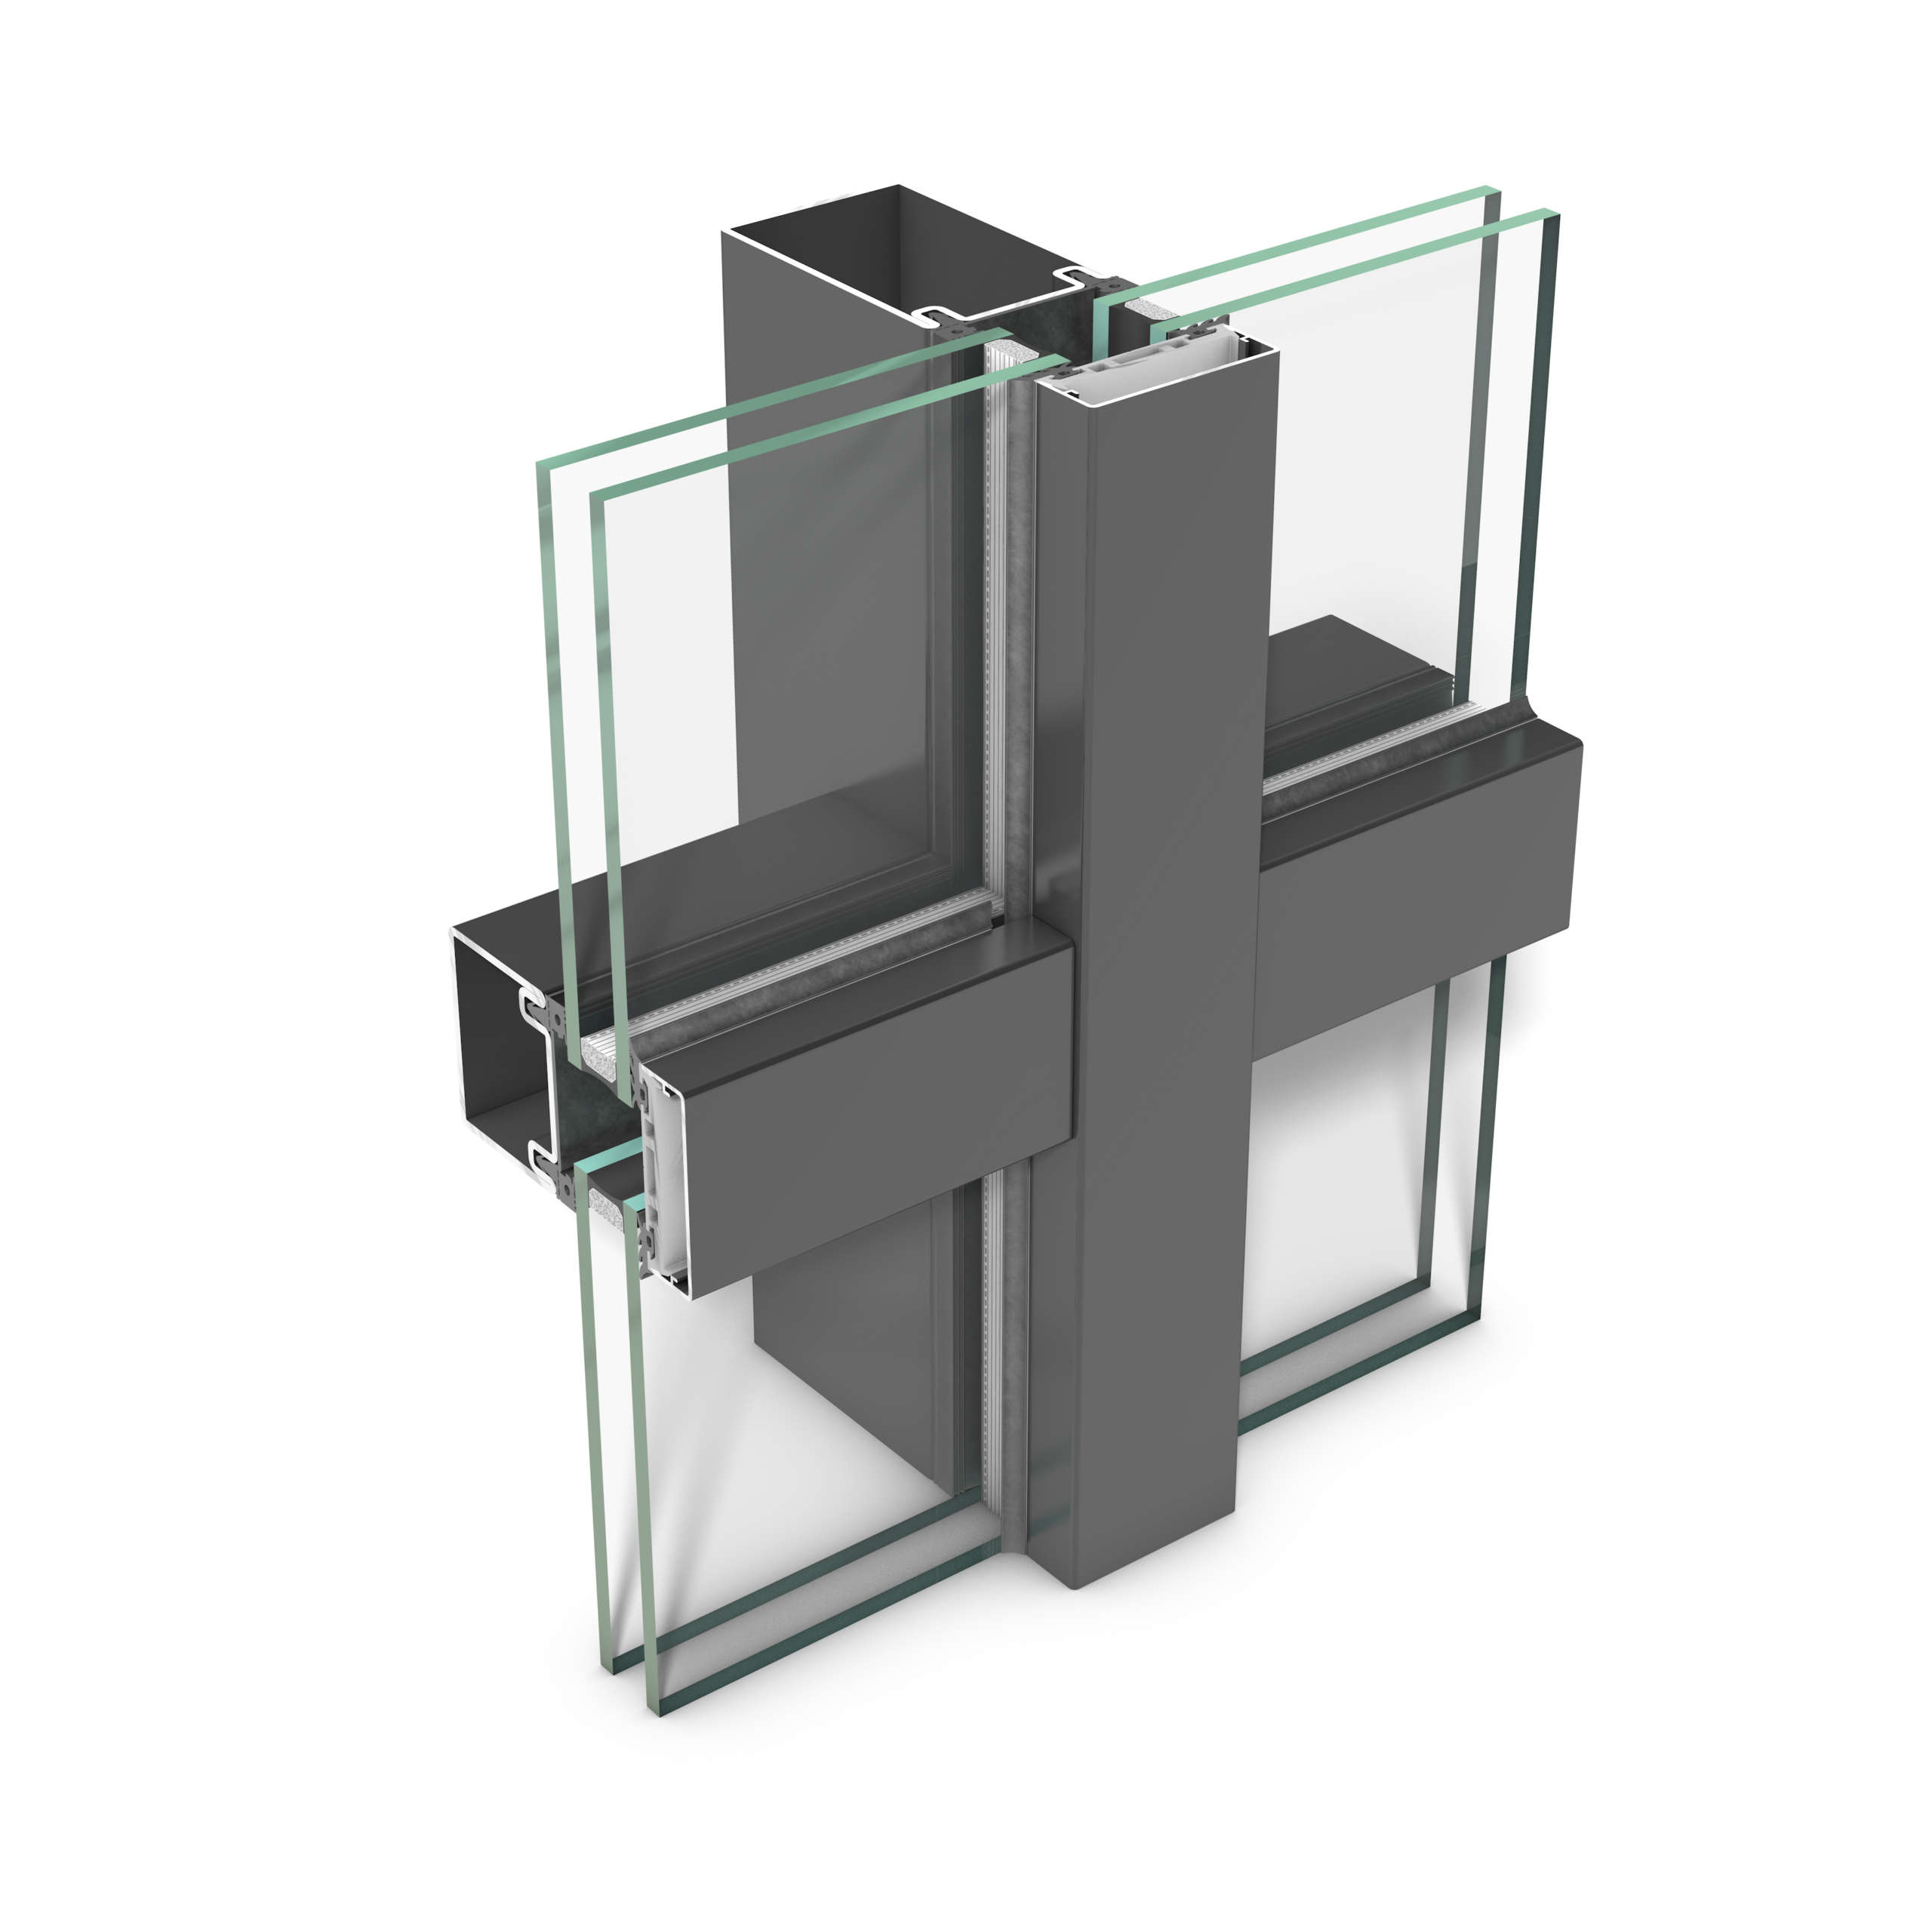 rp tec 60, mullion-transom steel curtain wall featuring a face width of 60 mm